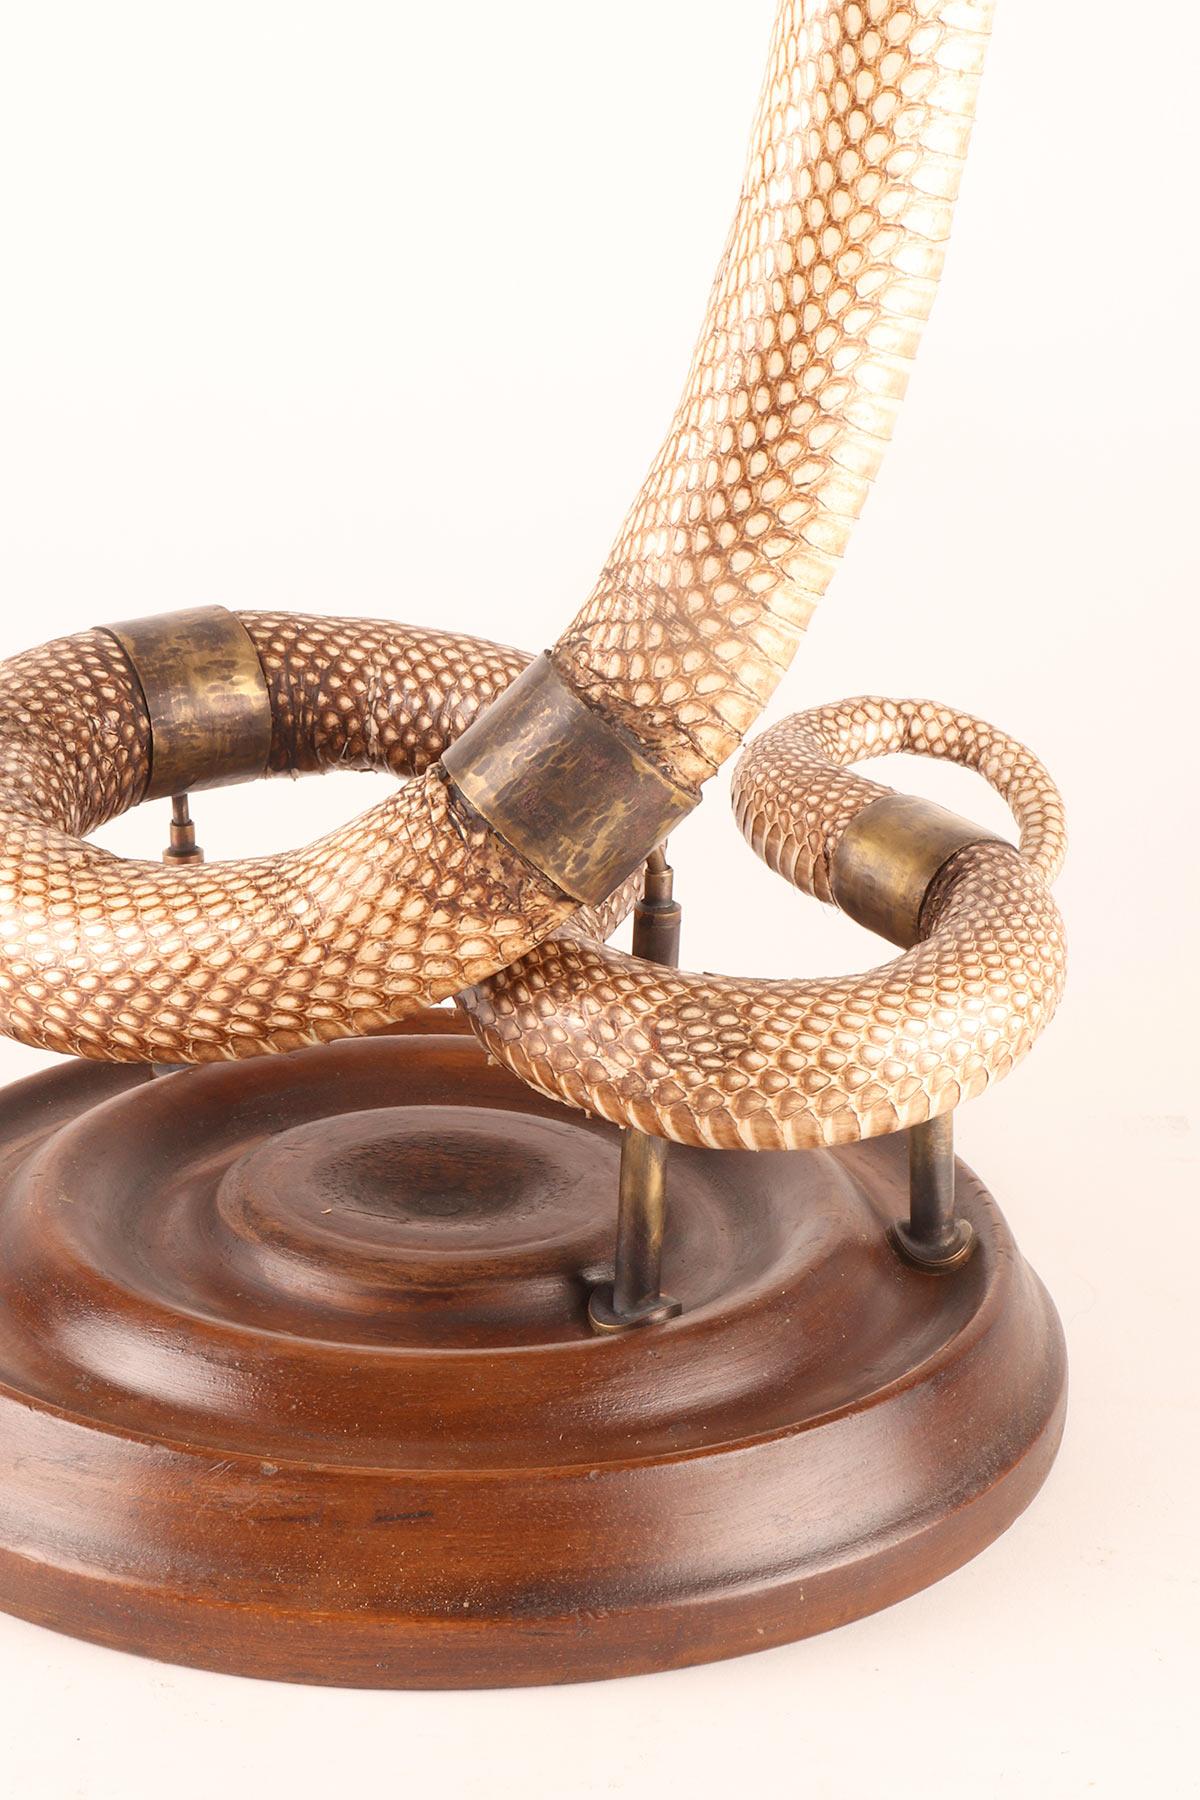 A specimen of Hemachatus hemachatus snake taxidermy, Italy 1890. For Sale 7